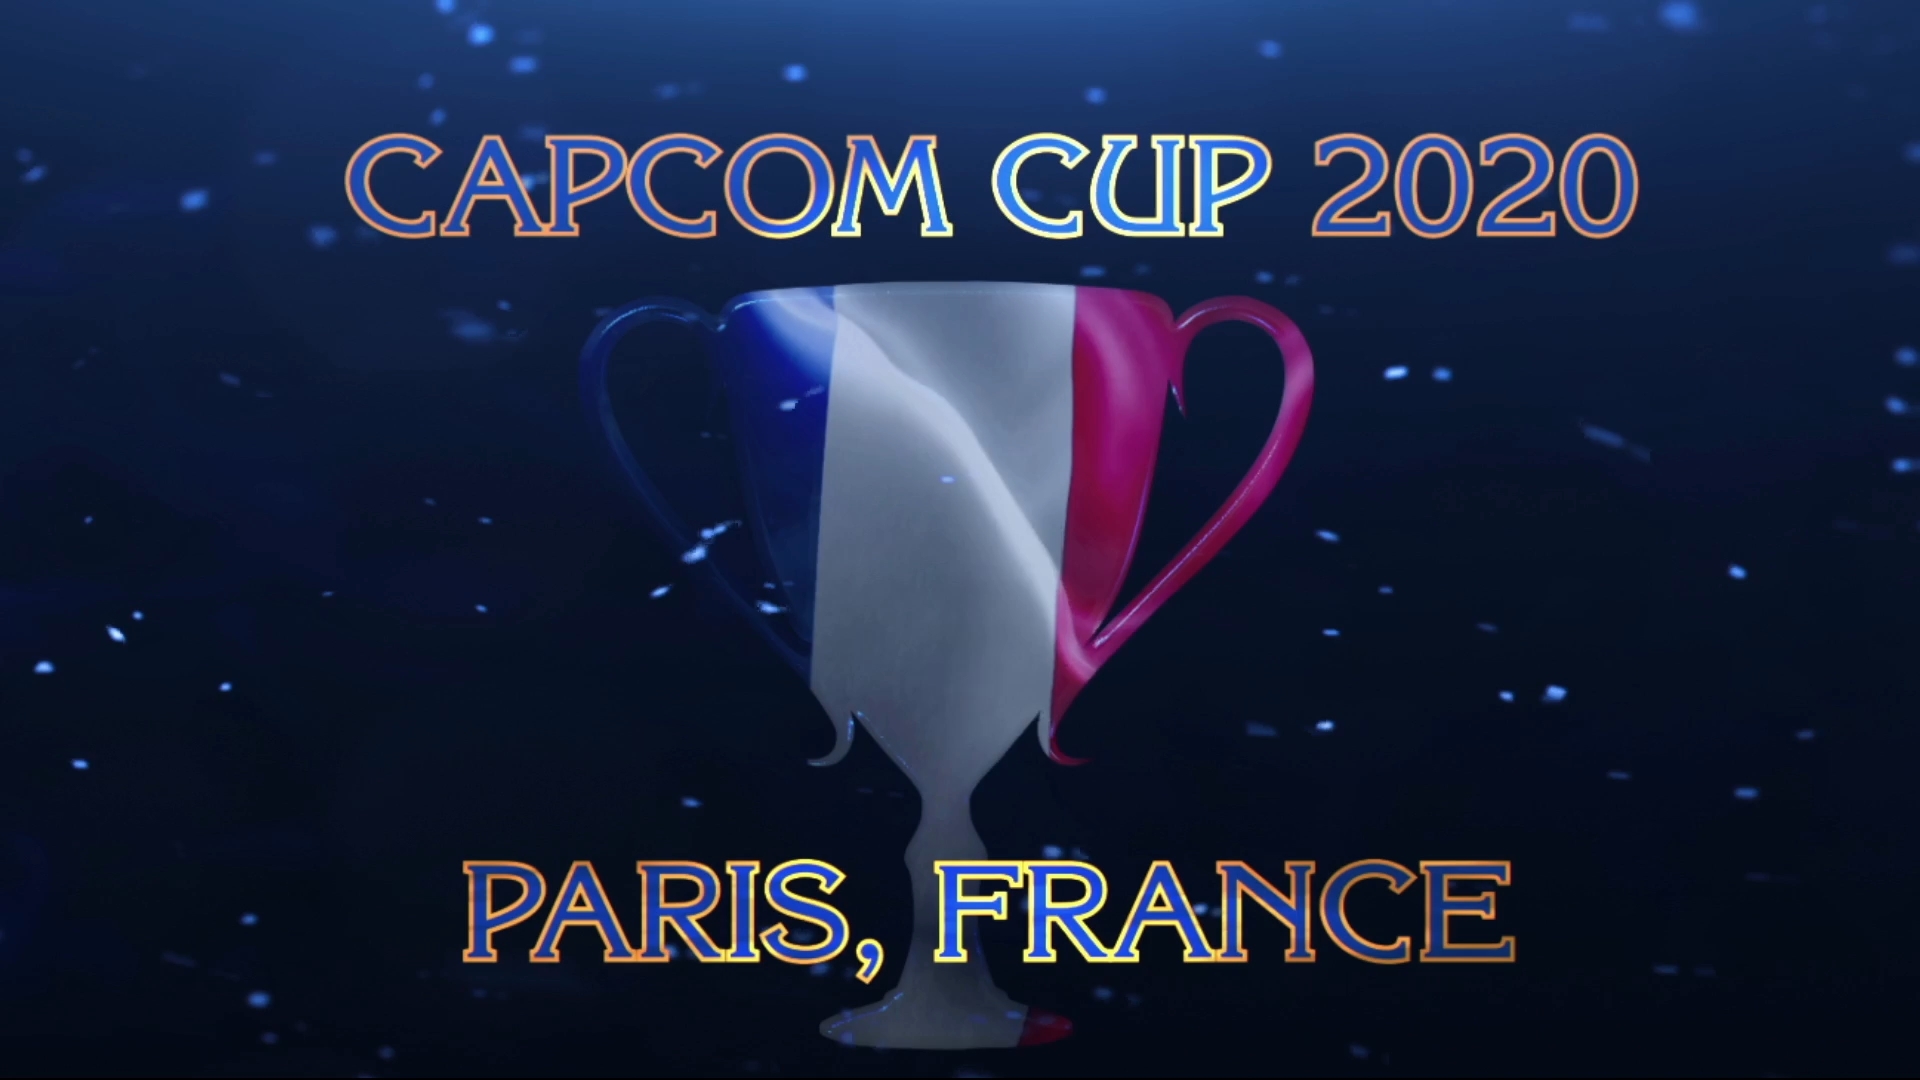 Cup 2020 will be held in Paris with major changes to the format